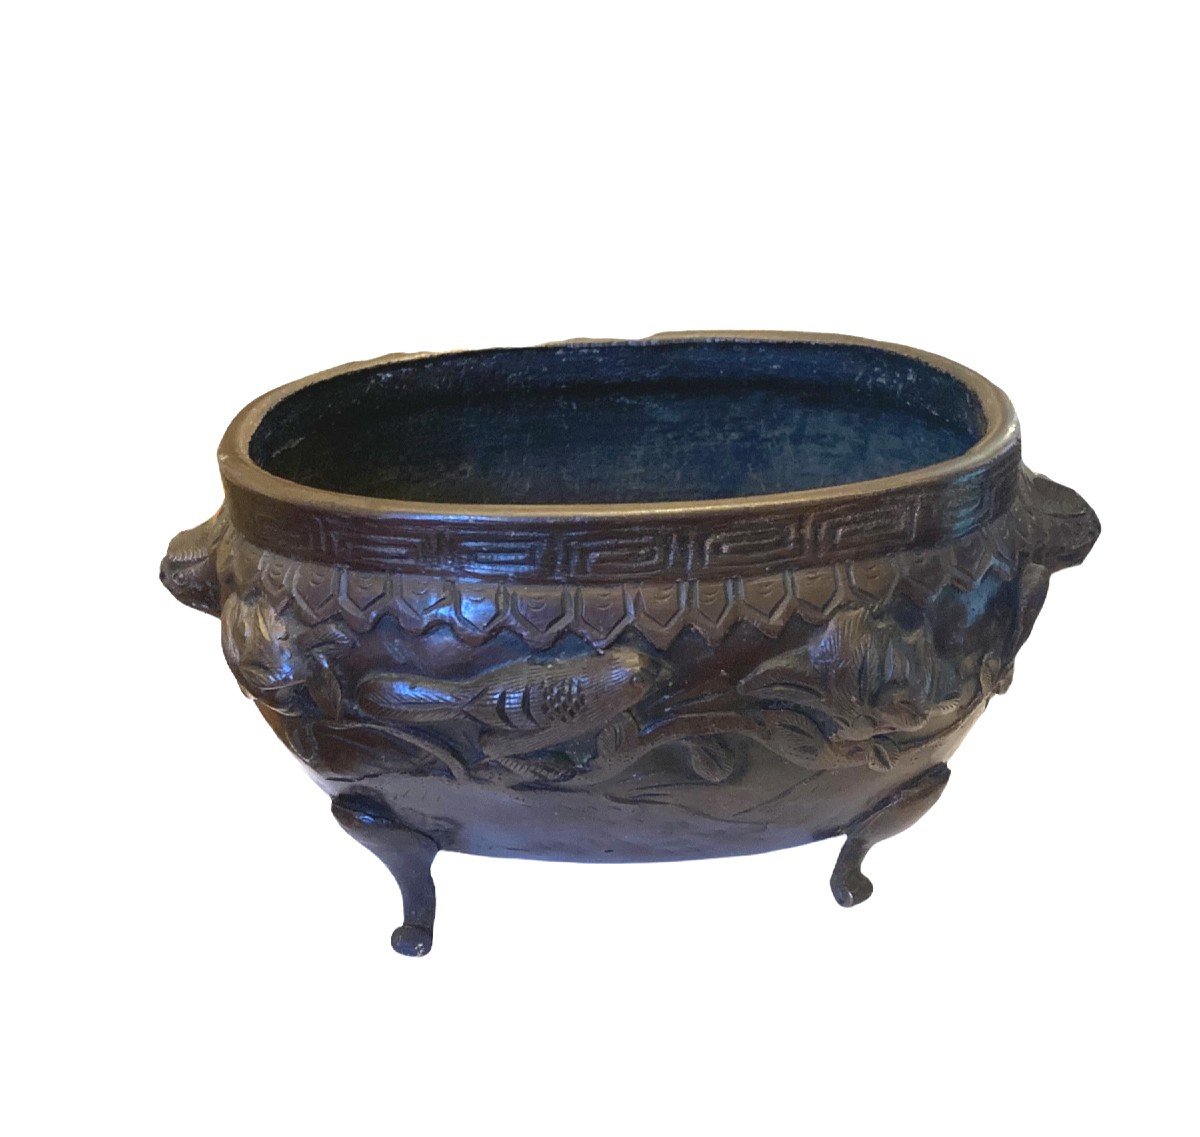 Magnificent Japanese Bronze Planter Late Nineteenth